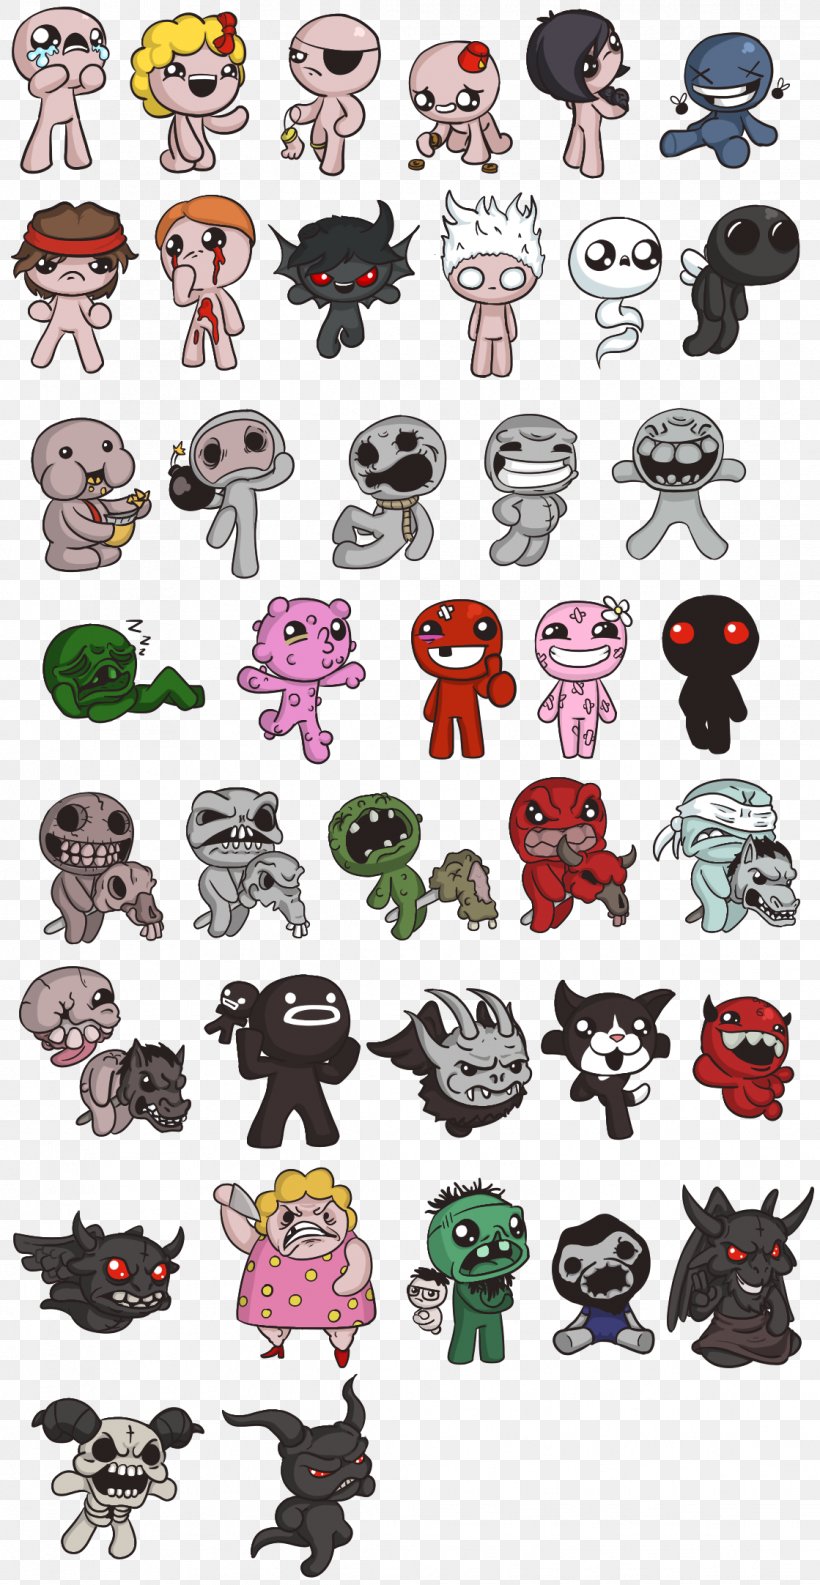 The Binding Of Isaac: Afterbirth Plus Fan Art Character Drawing, PNG, 1119x2164px, Binding Of Isaac, Art, Binding Of Isaac Afterbirth Plus, Binding Of Isaac Rebirth, Cartoon Download Free